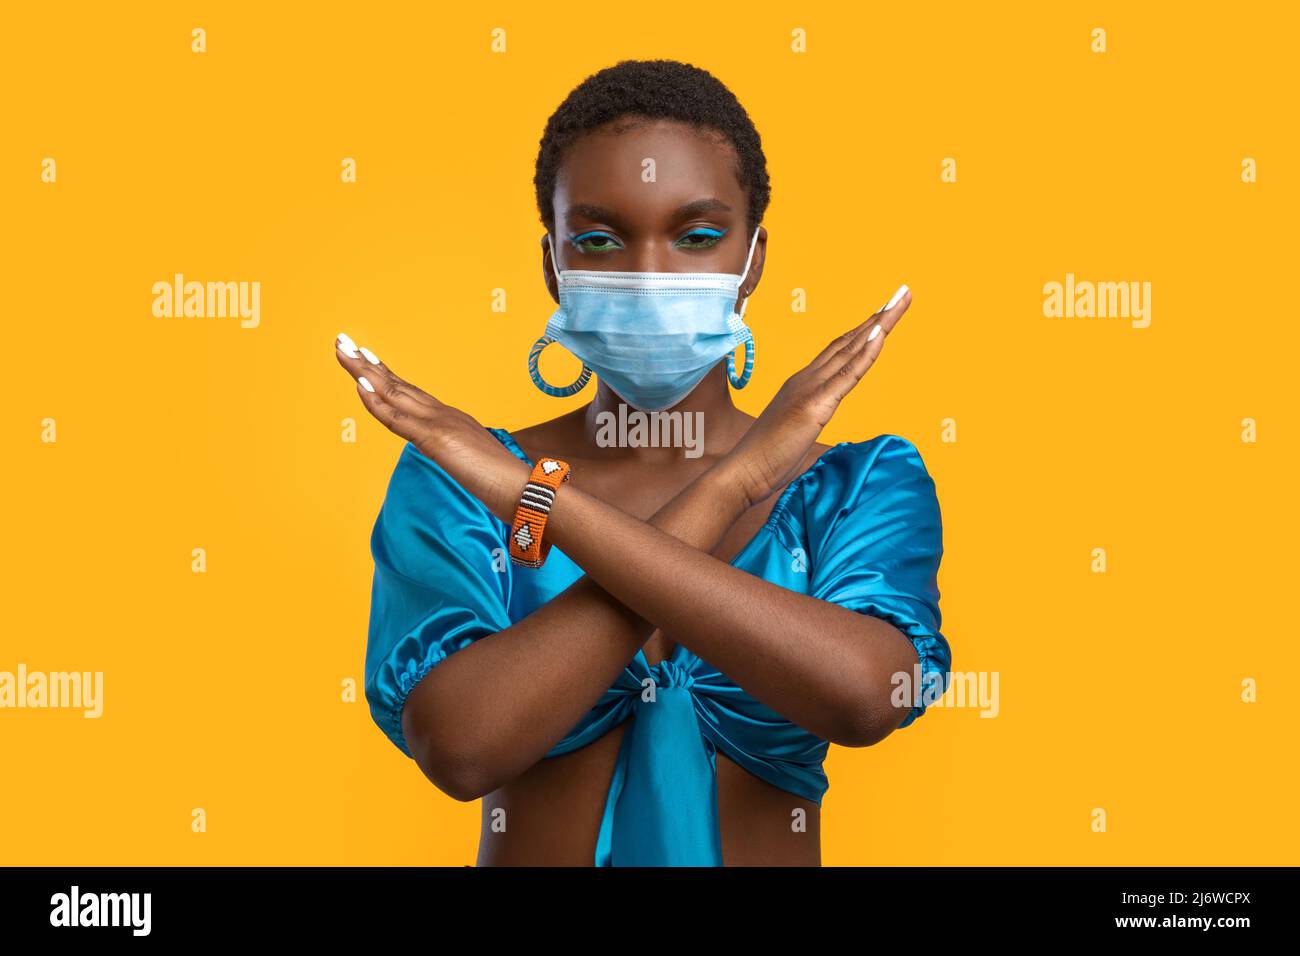 African american lady in face mask showing no gesture Stock Photo